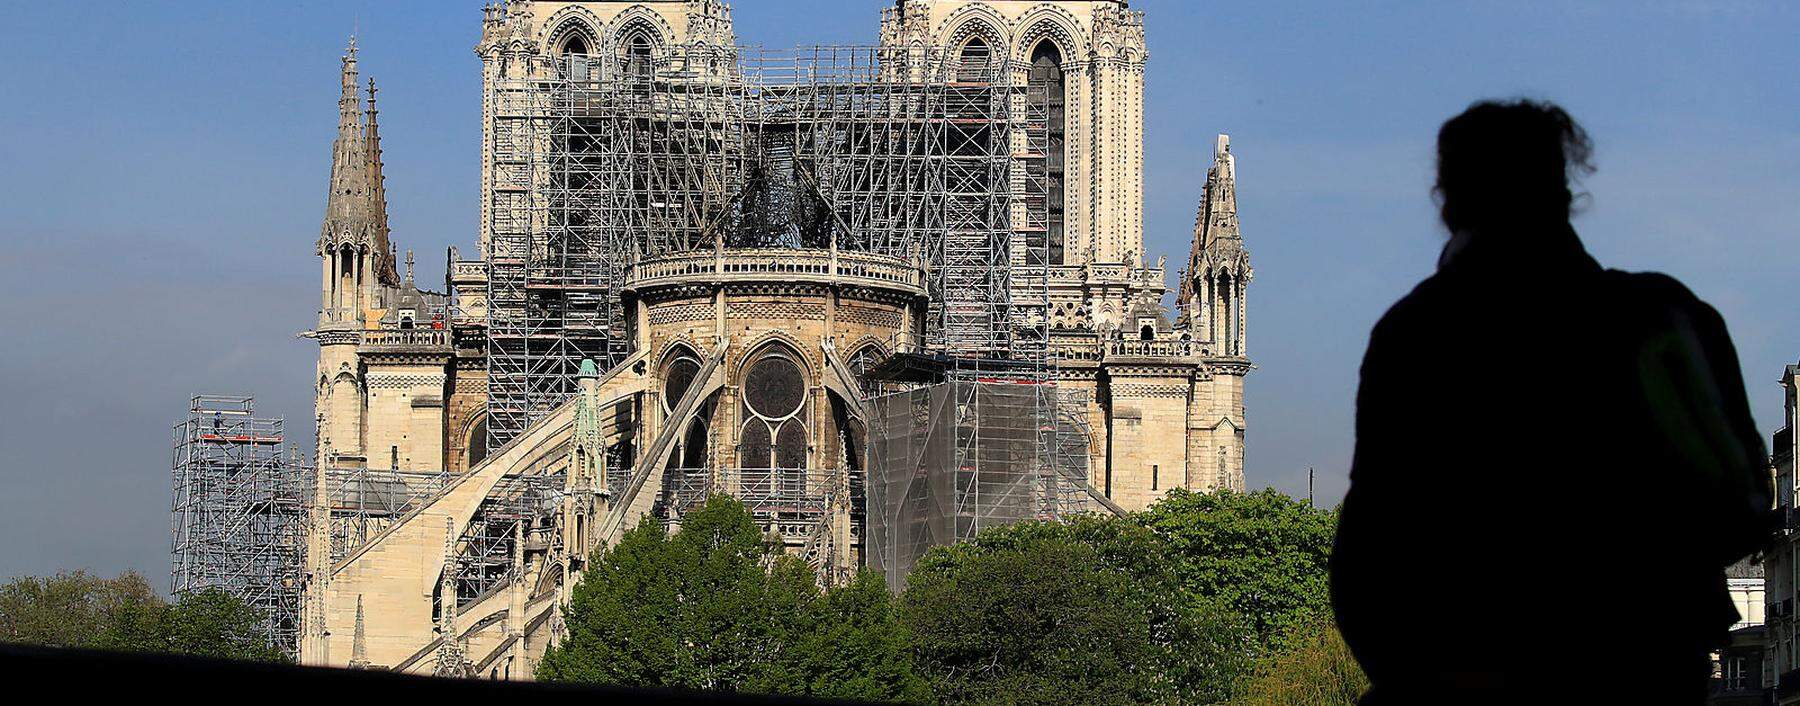 A person looks at Notre-Dame Cathedral after a massive fire devastated large parts of the gothic structure in Paris